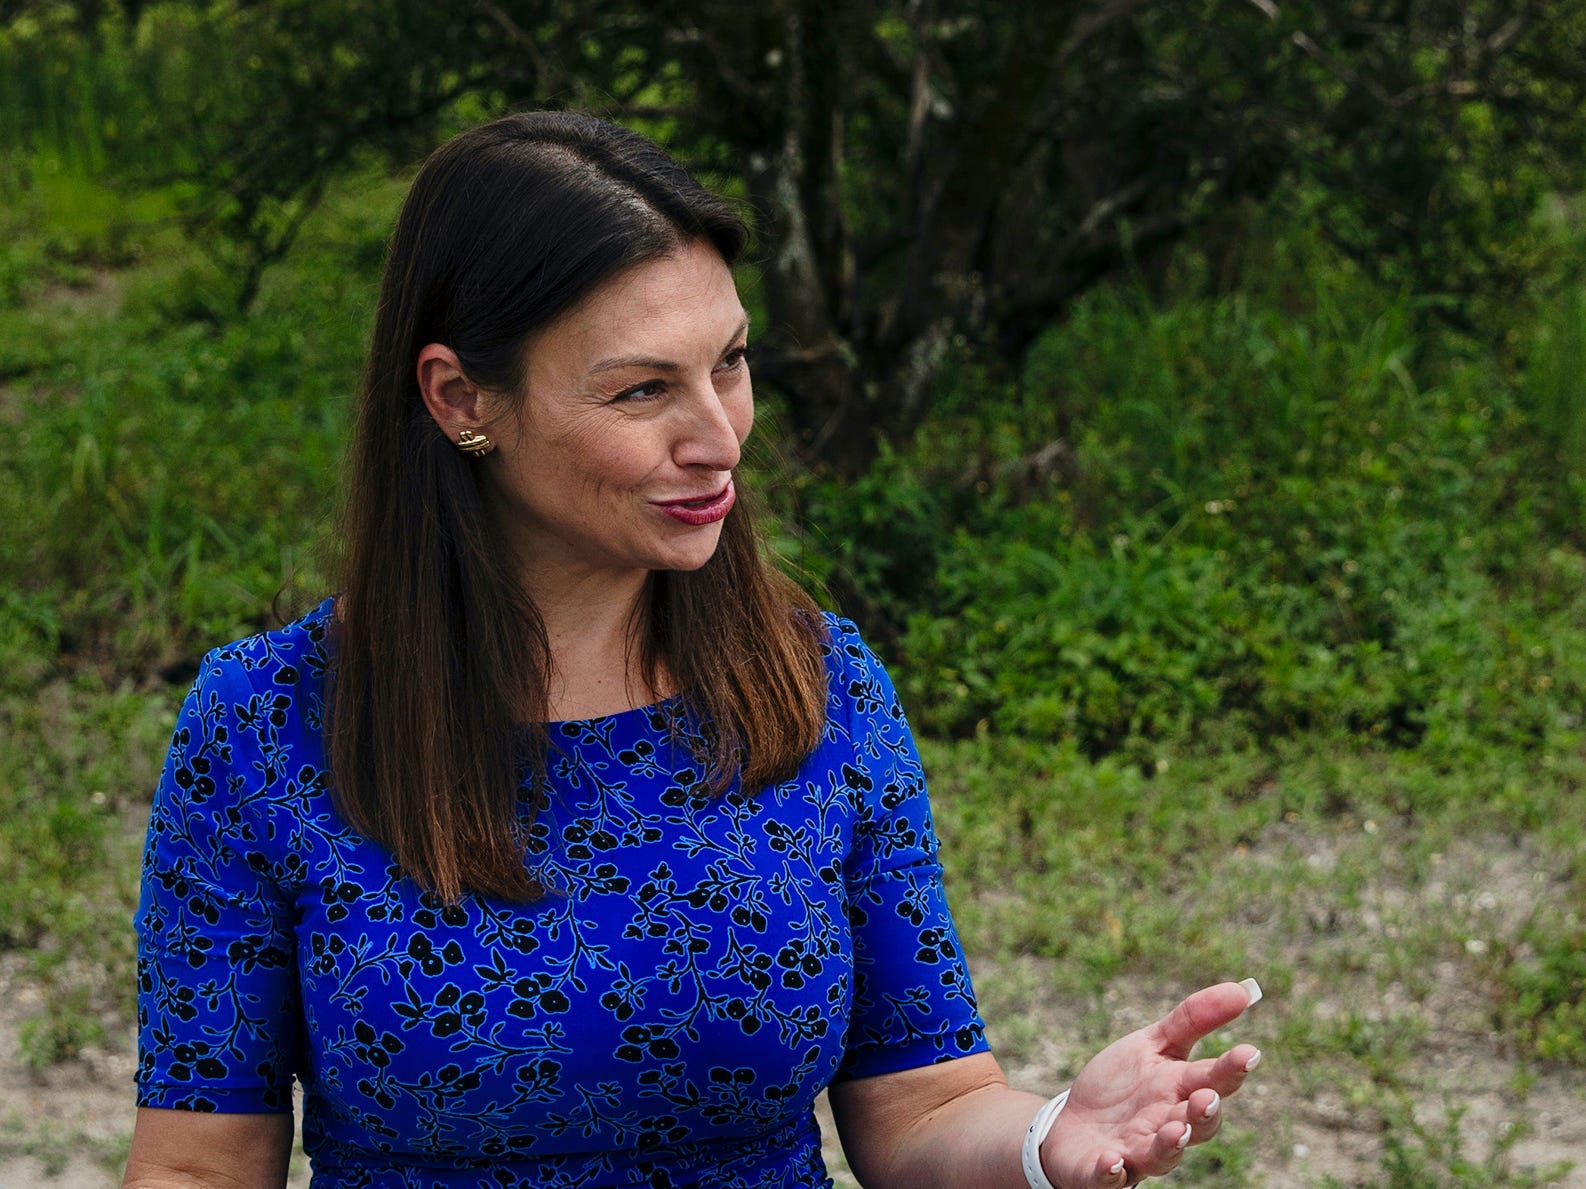 ESTERO, FL - JUNE, 13: Florida agriculture commissioner Nikki Fried, center, speaks with Cody Lastinger, left, and Jeff Kreiger at Corkscrew Grove in Estero, FL on Thursday, June 13, 2019. Fried toured orange groves that are dying from citrus greening that could potentially be replaced with hemp plants. (Photo by Scott McIntyre/For The Washington Post via Getty Images)